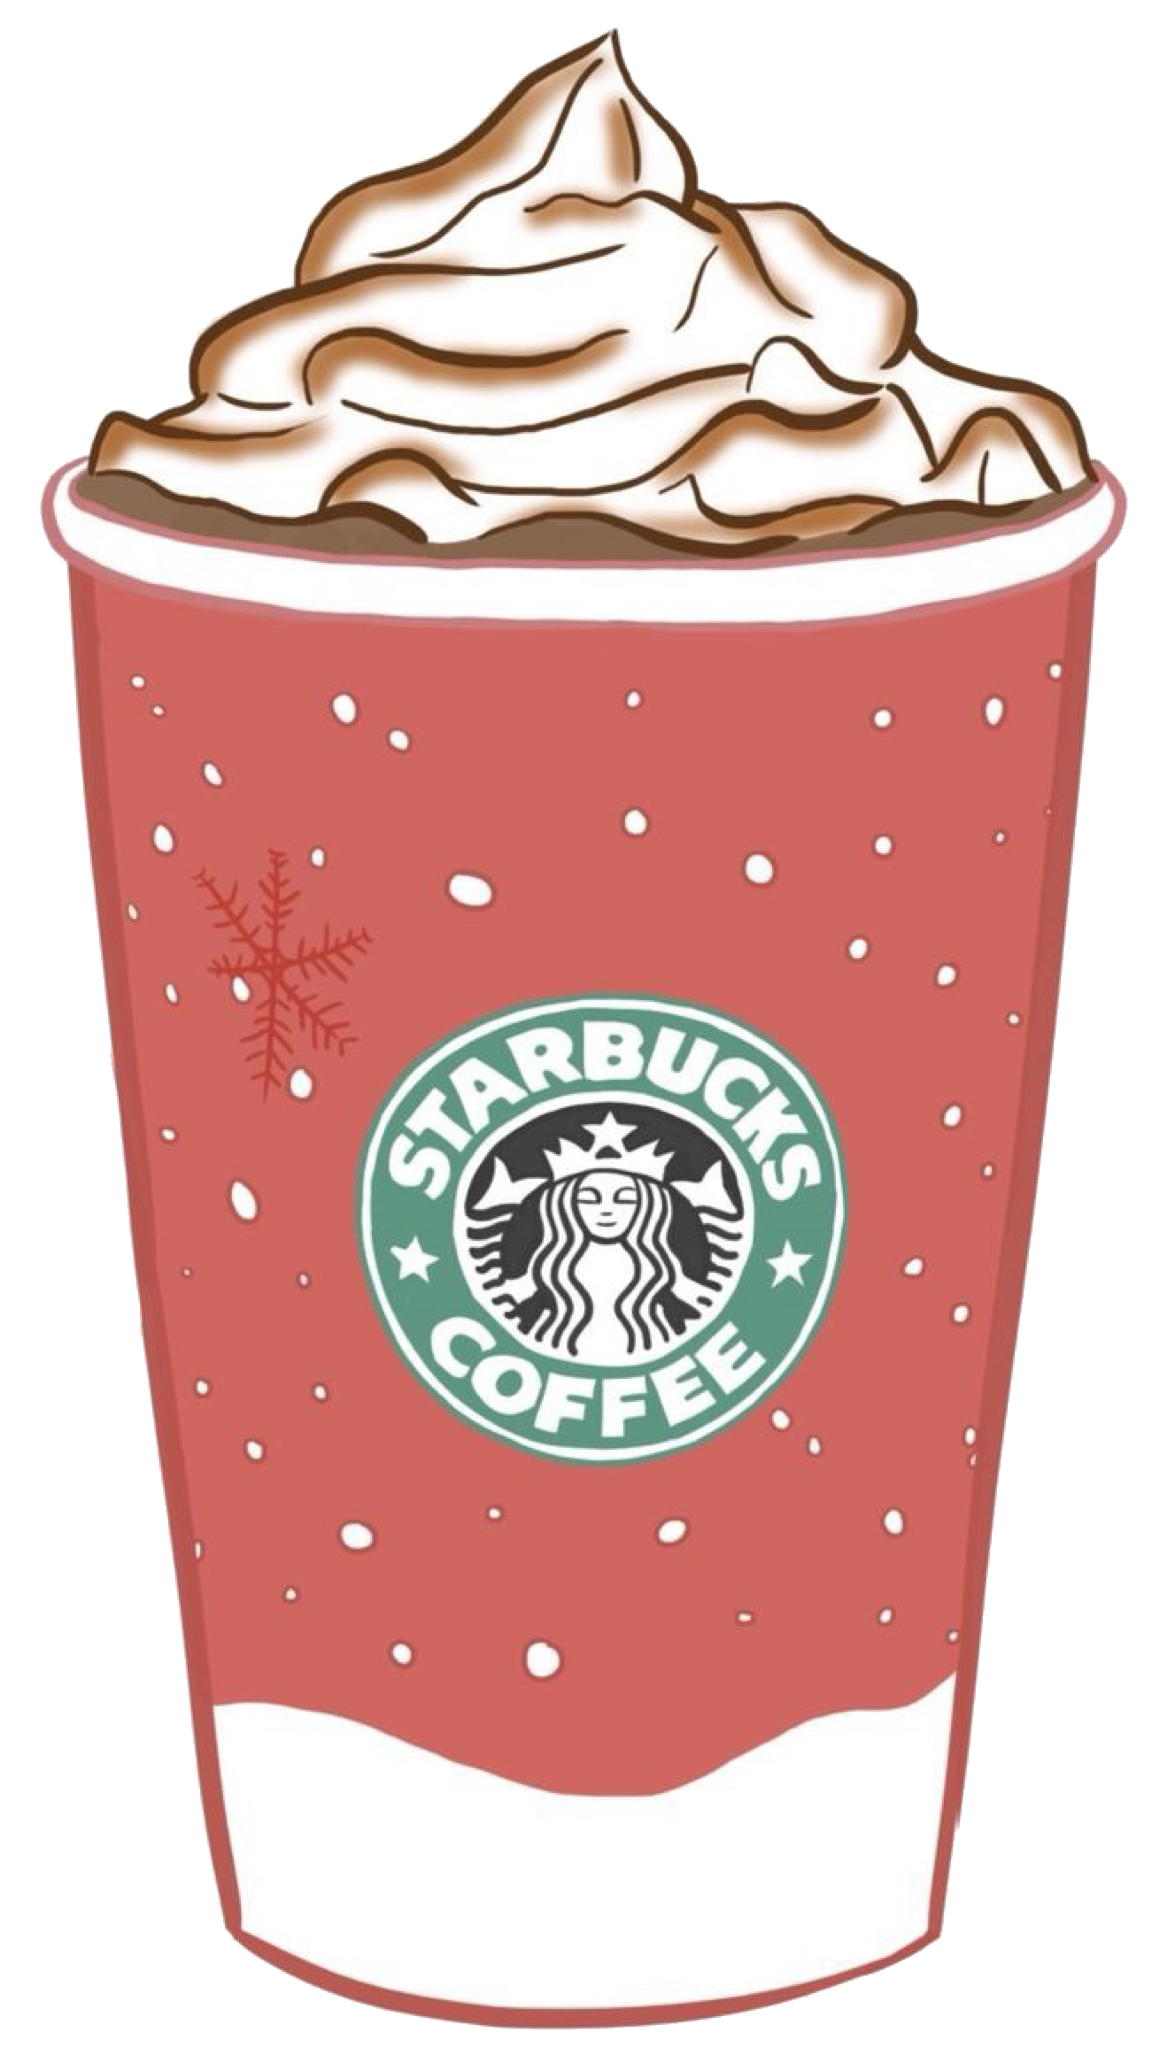 Frappuccino Tea Coffee Drink Starbucks PNG Image High Quality PNG Image